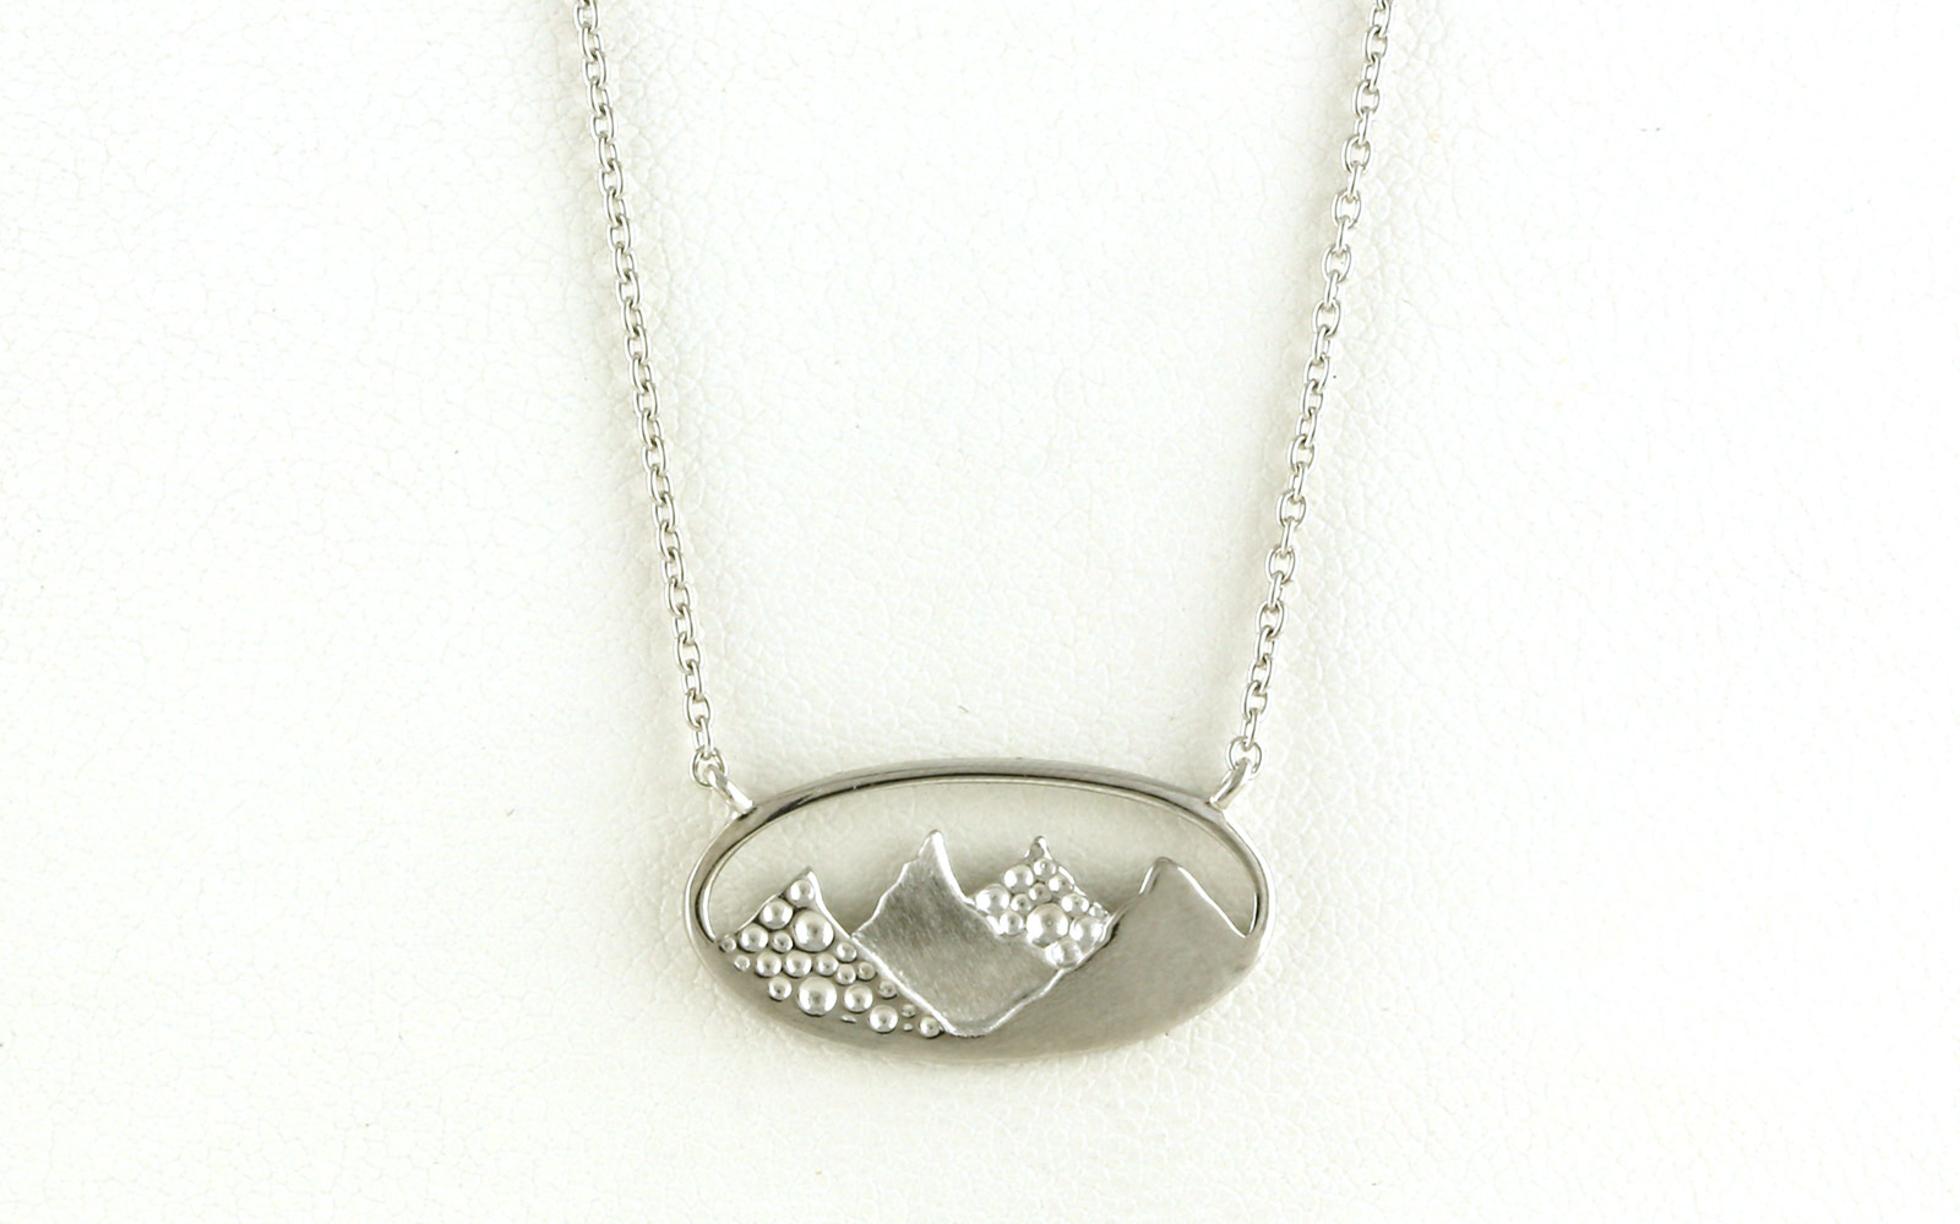 Oval Mountain Range Necklace on Split Chain with Satin Finish in Sterling Silver